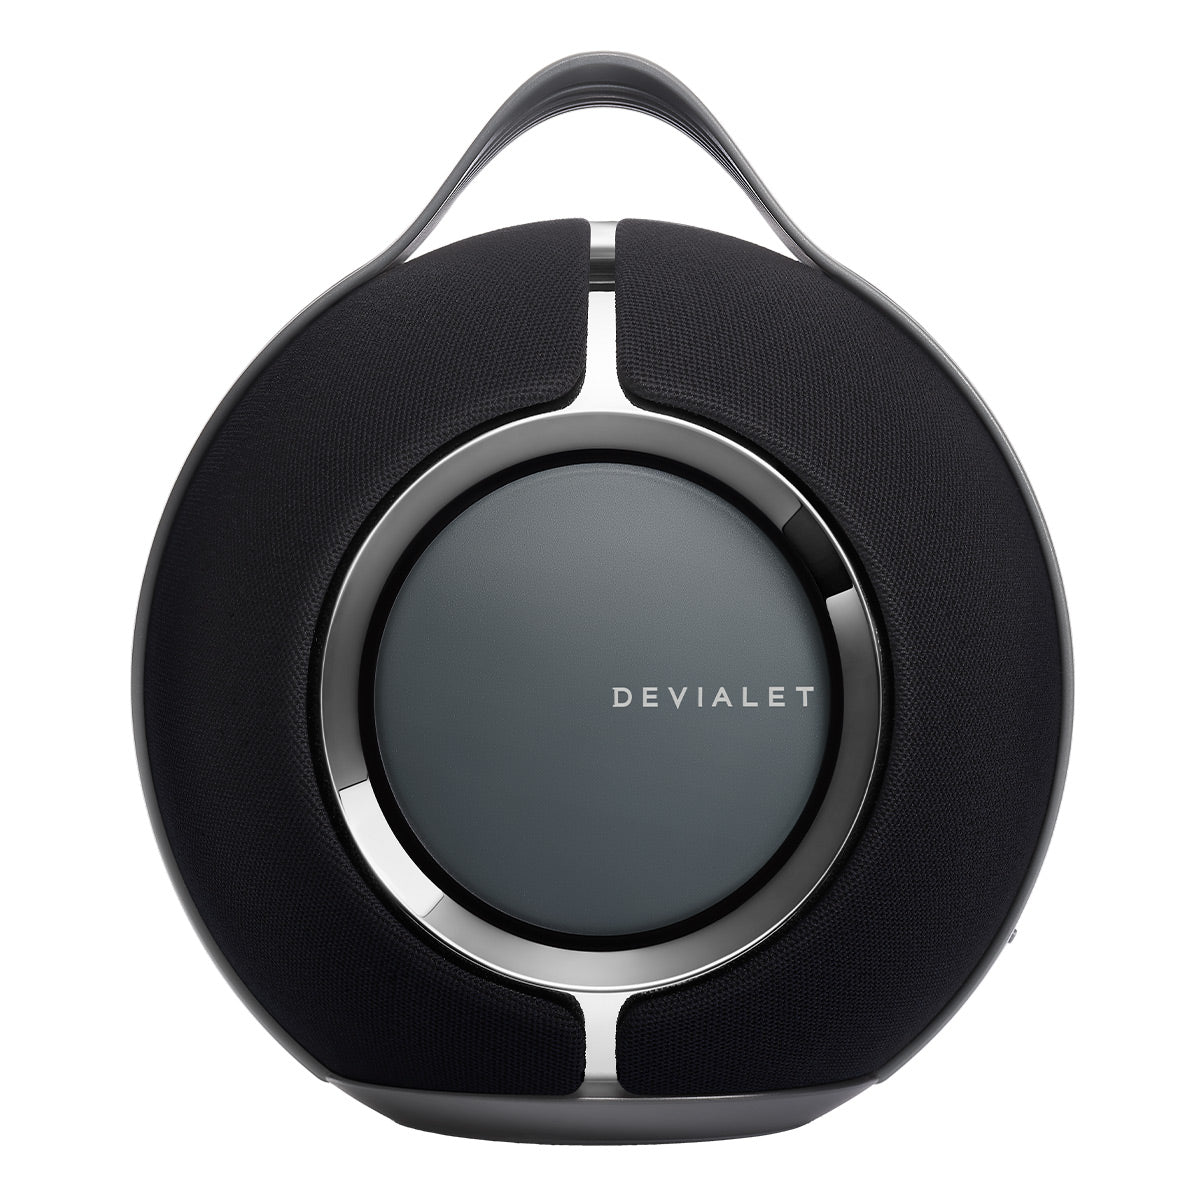 Devialet Mania Portable Bluetooth Smart Speaker (Deep Black) with Charging Station